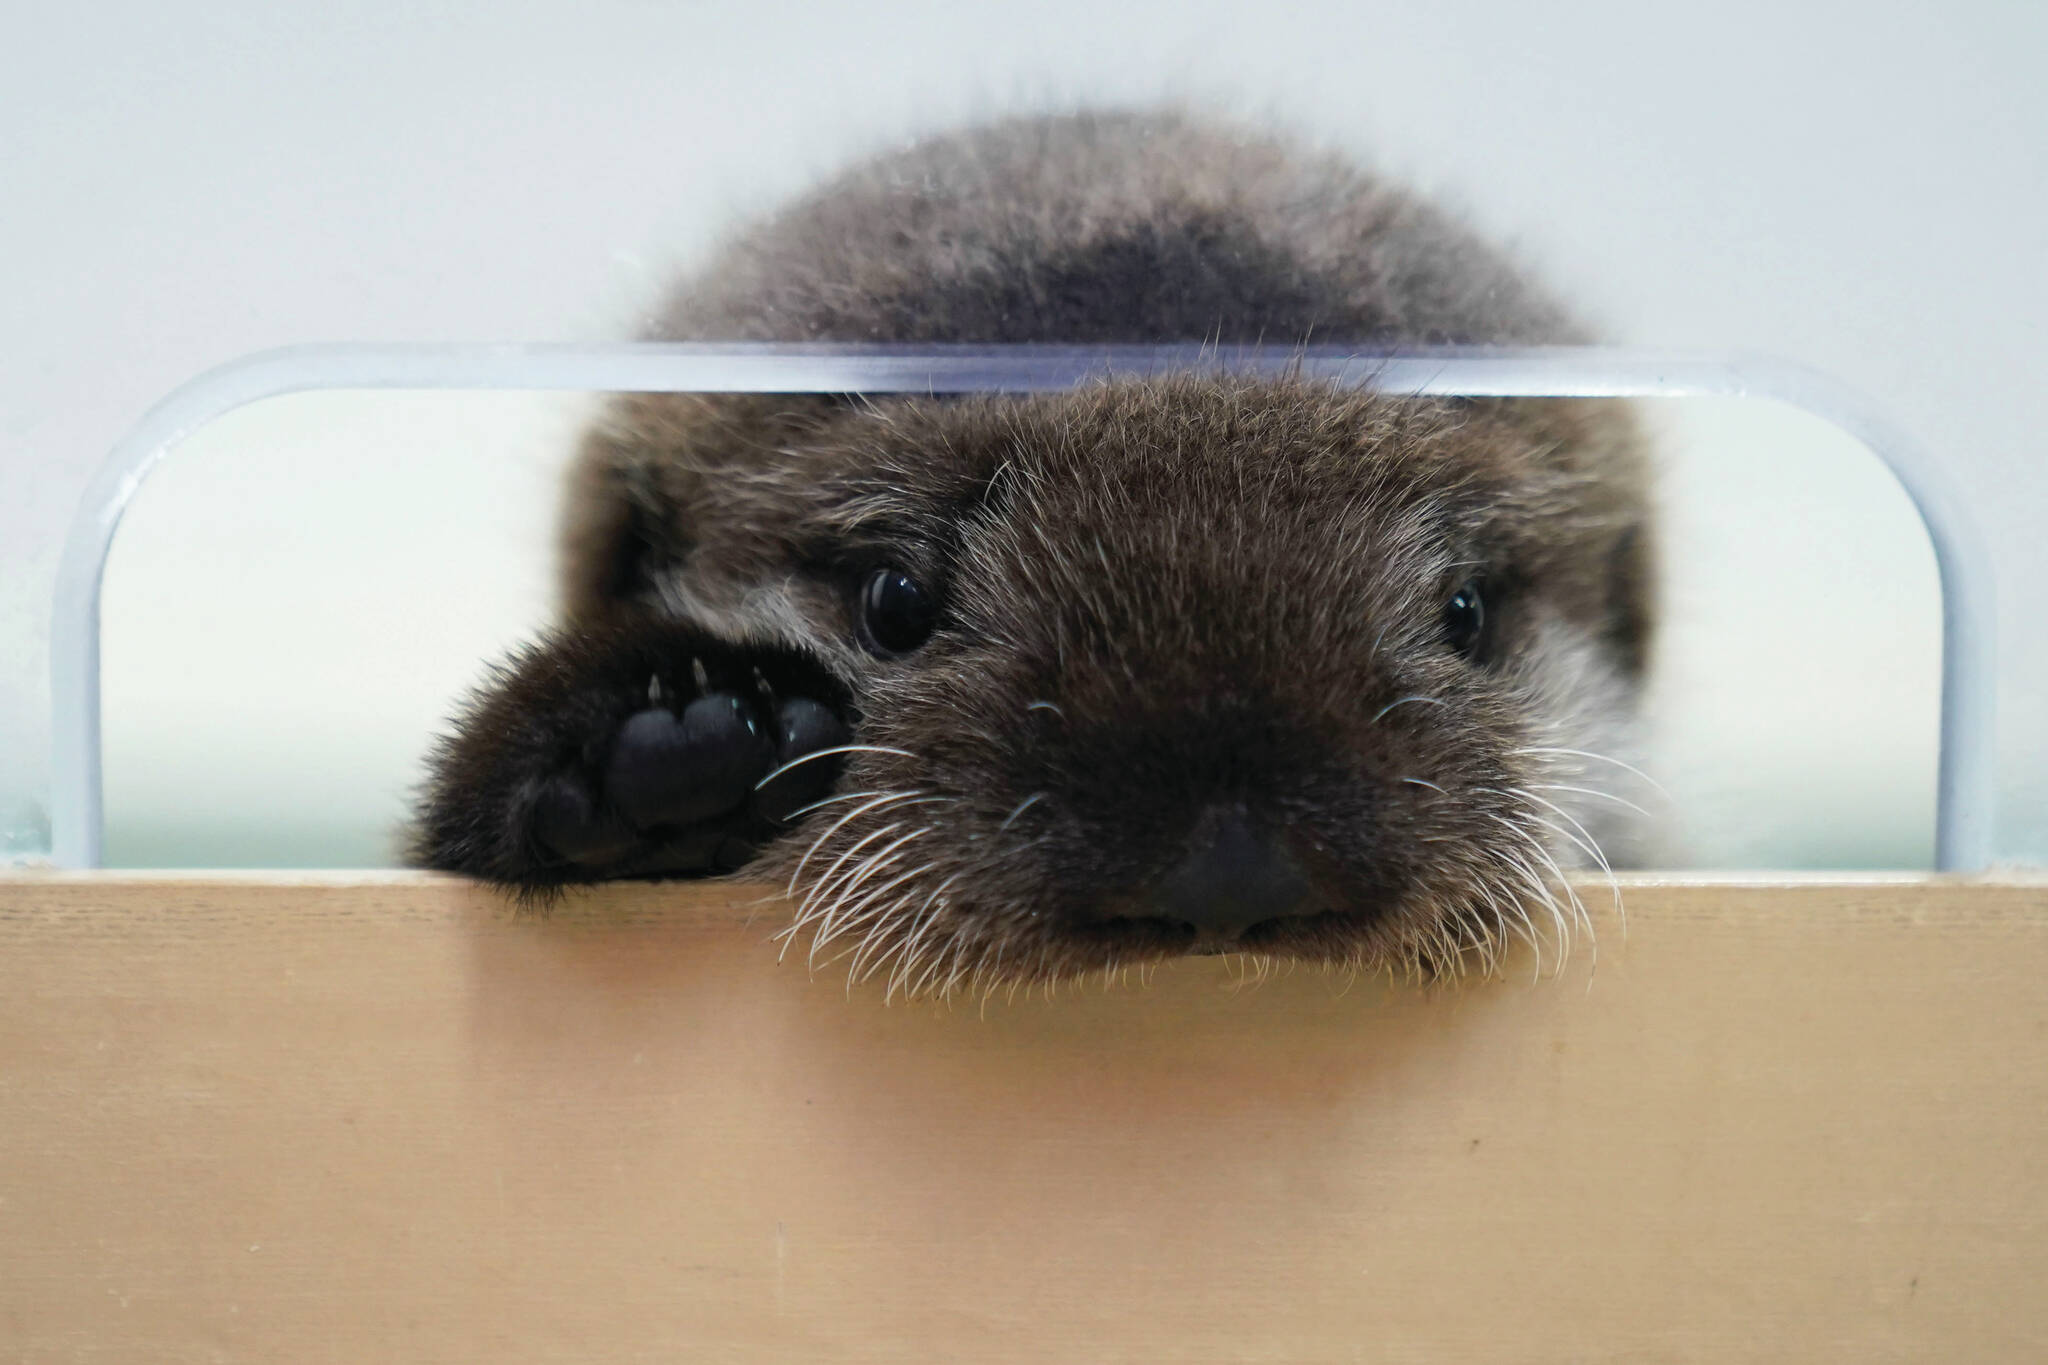 An 8-week-old sea otter rescued from Seldovia, Alaska, peaks out of his enclosure at Shedd Aquarium Wednesday, Dec. 6, 2023, in Chicago. The otter was found alone and malnourished and was taken to the Alaska SeaLife Center in Seward, Alaska, which contacted Shedd, and the Chicago aquarium was able to take the otter in. He will remain quarantined for a few months while he learns to groom and eat solid foods before being introduced to Shedd’s five other sea otters. (AP Photo/Erin Hooley)